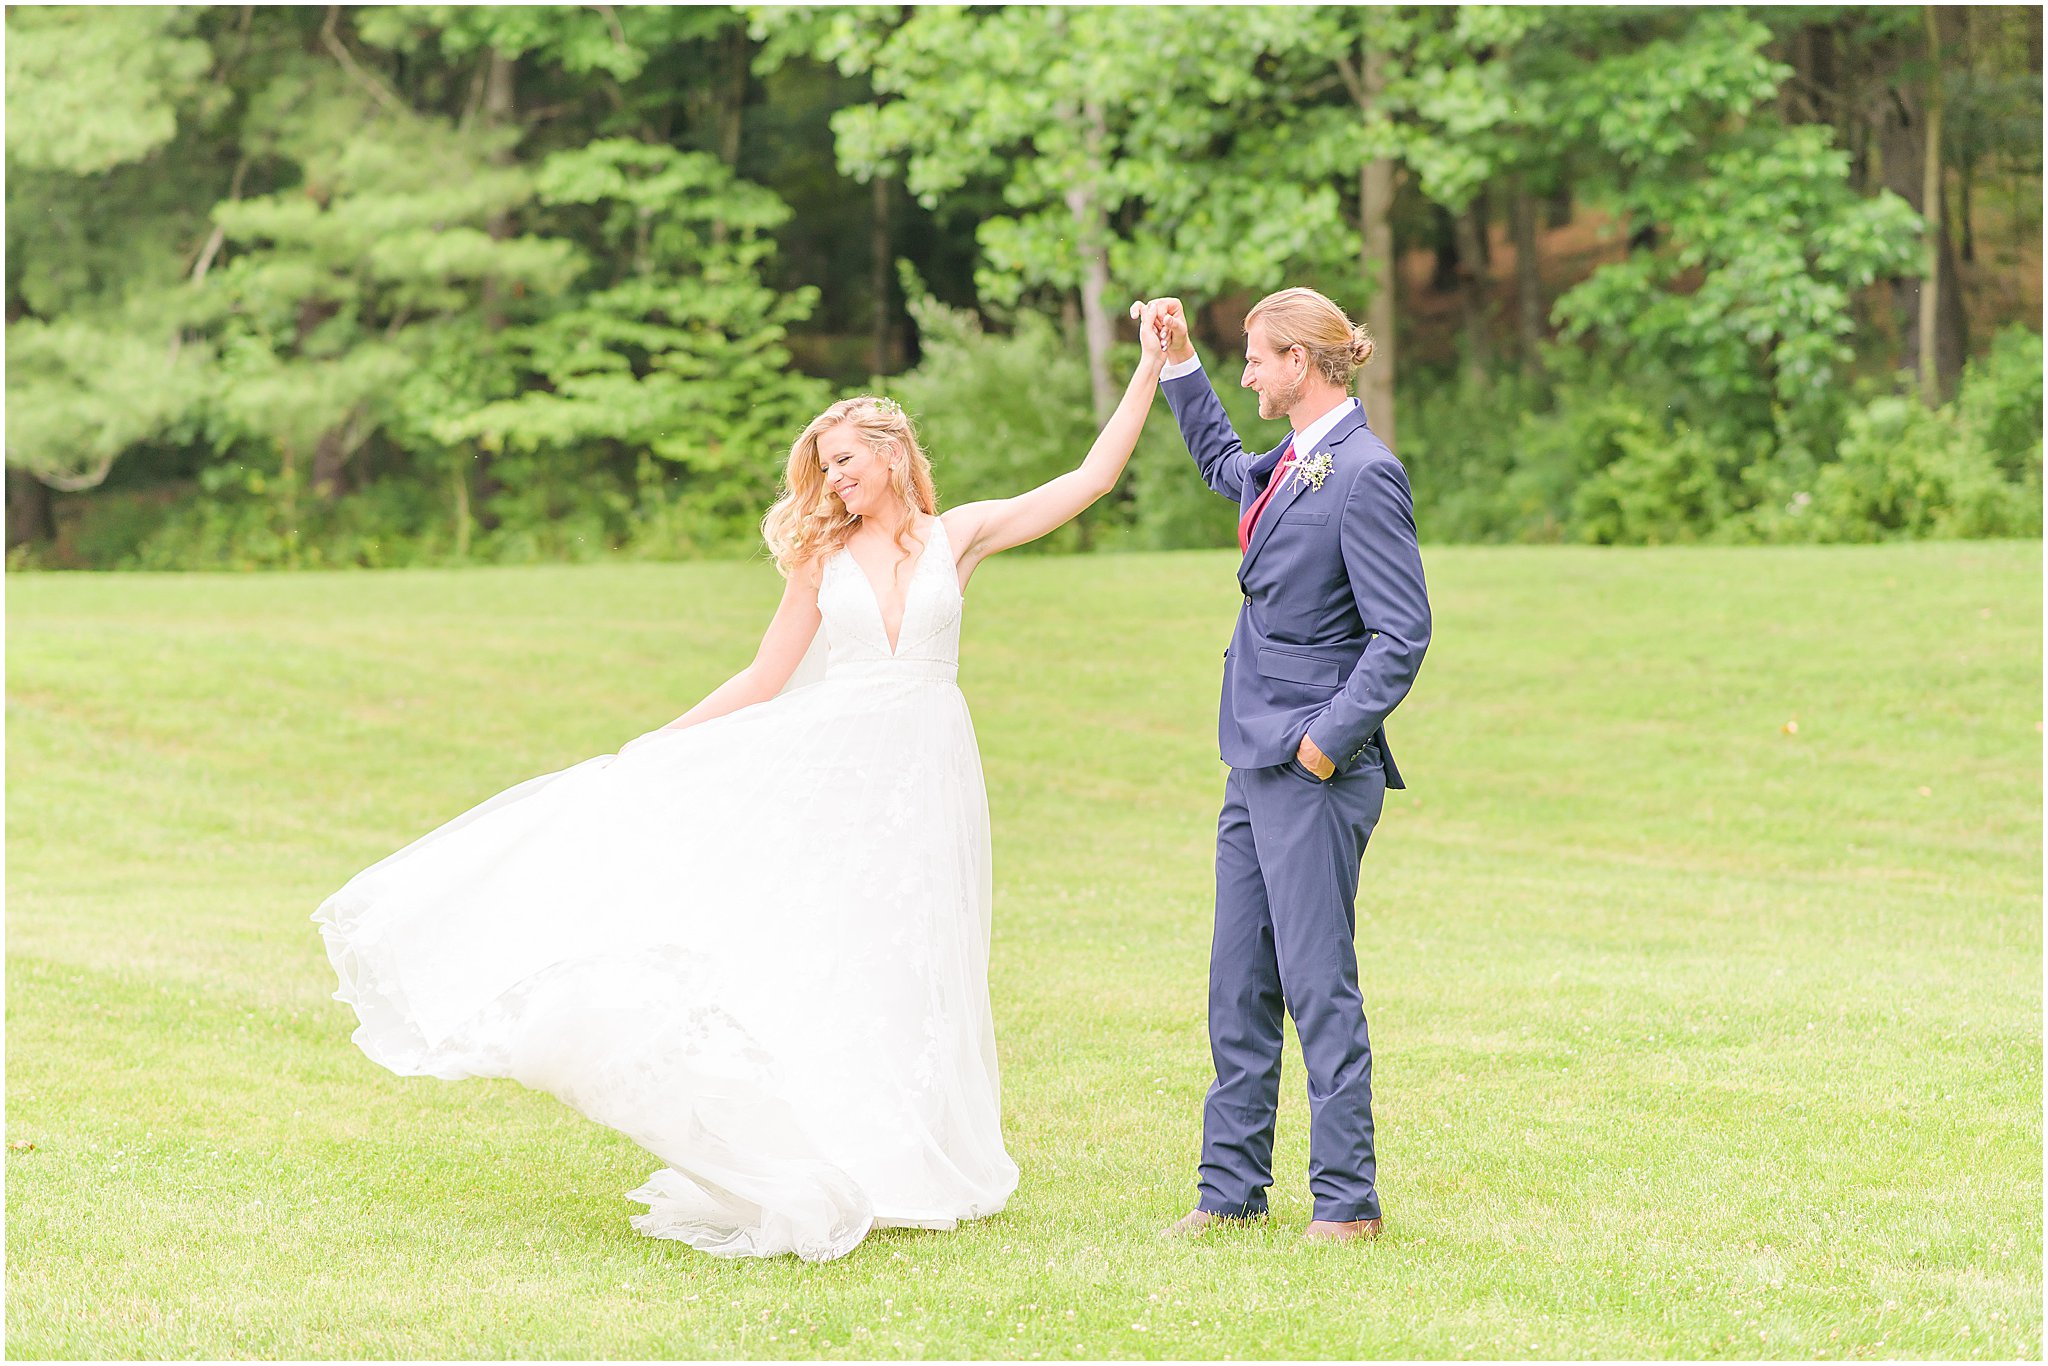 Bride twirling dress while groom smiles at her The Old Barn At Brown County wedding